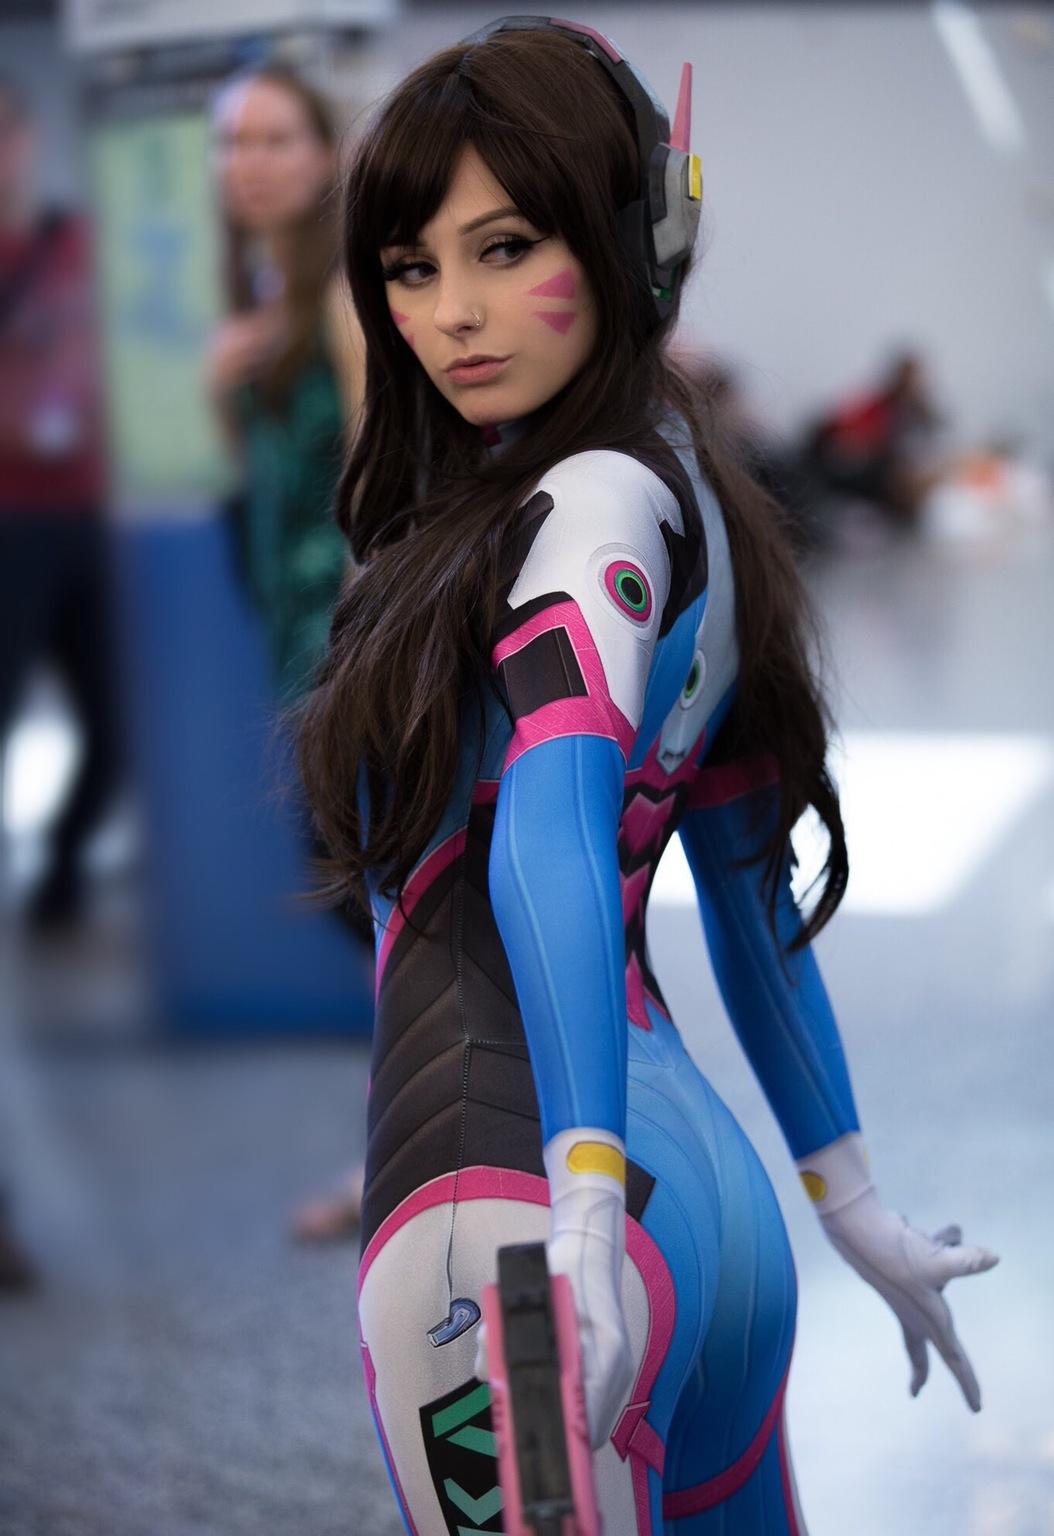 70+ Hot Pictures Of D.Va From Overwatch 32